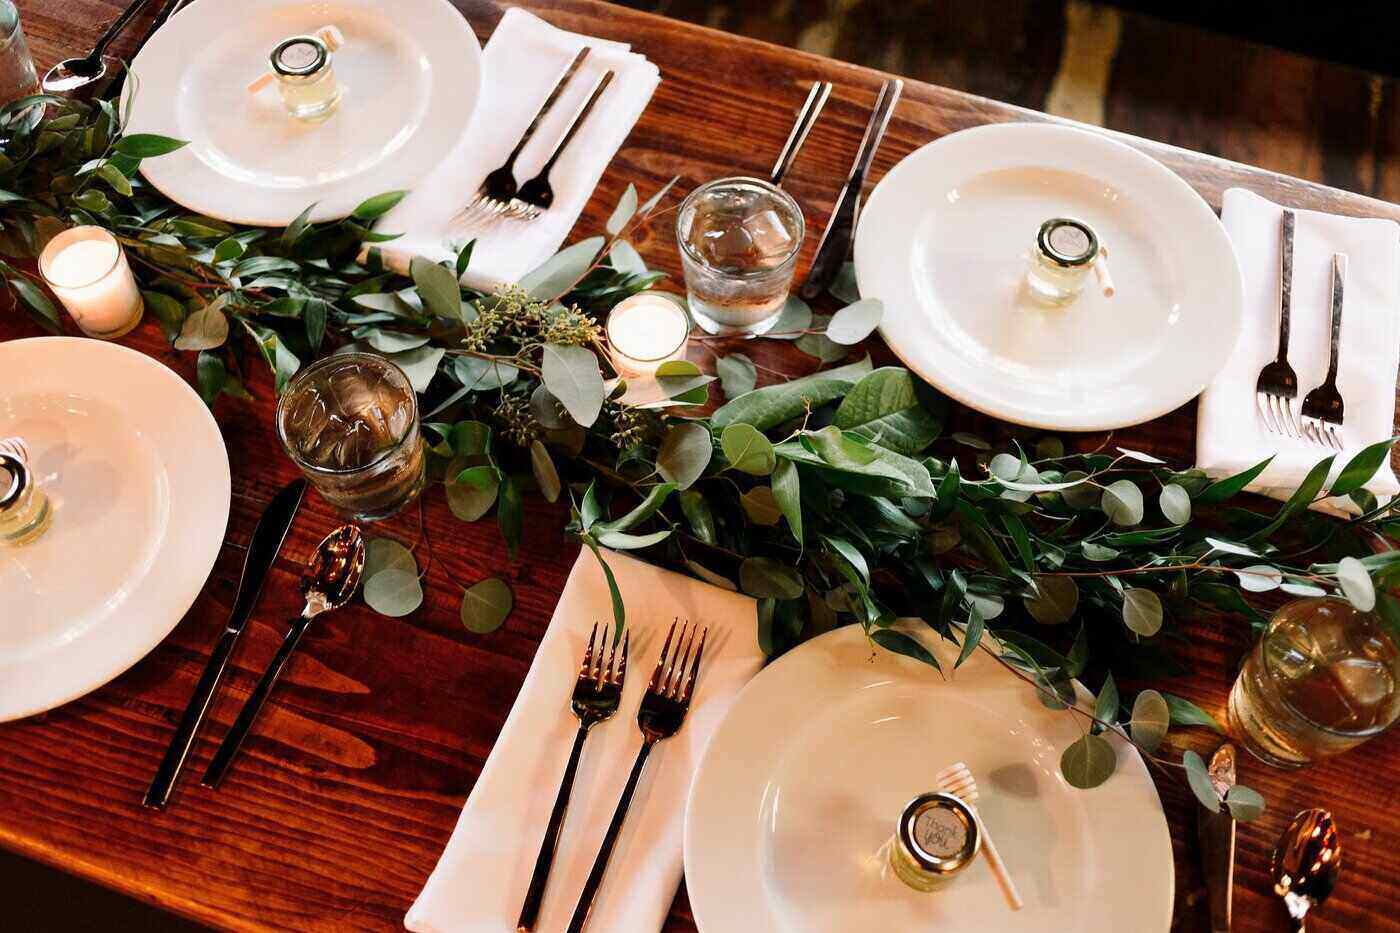 greenery on wedding table - 5 tips for creating the perfect wedding centerpiece